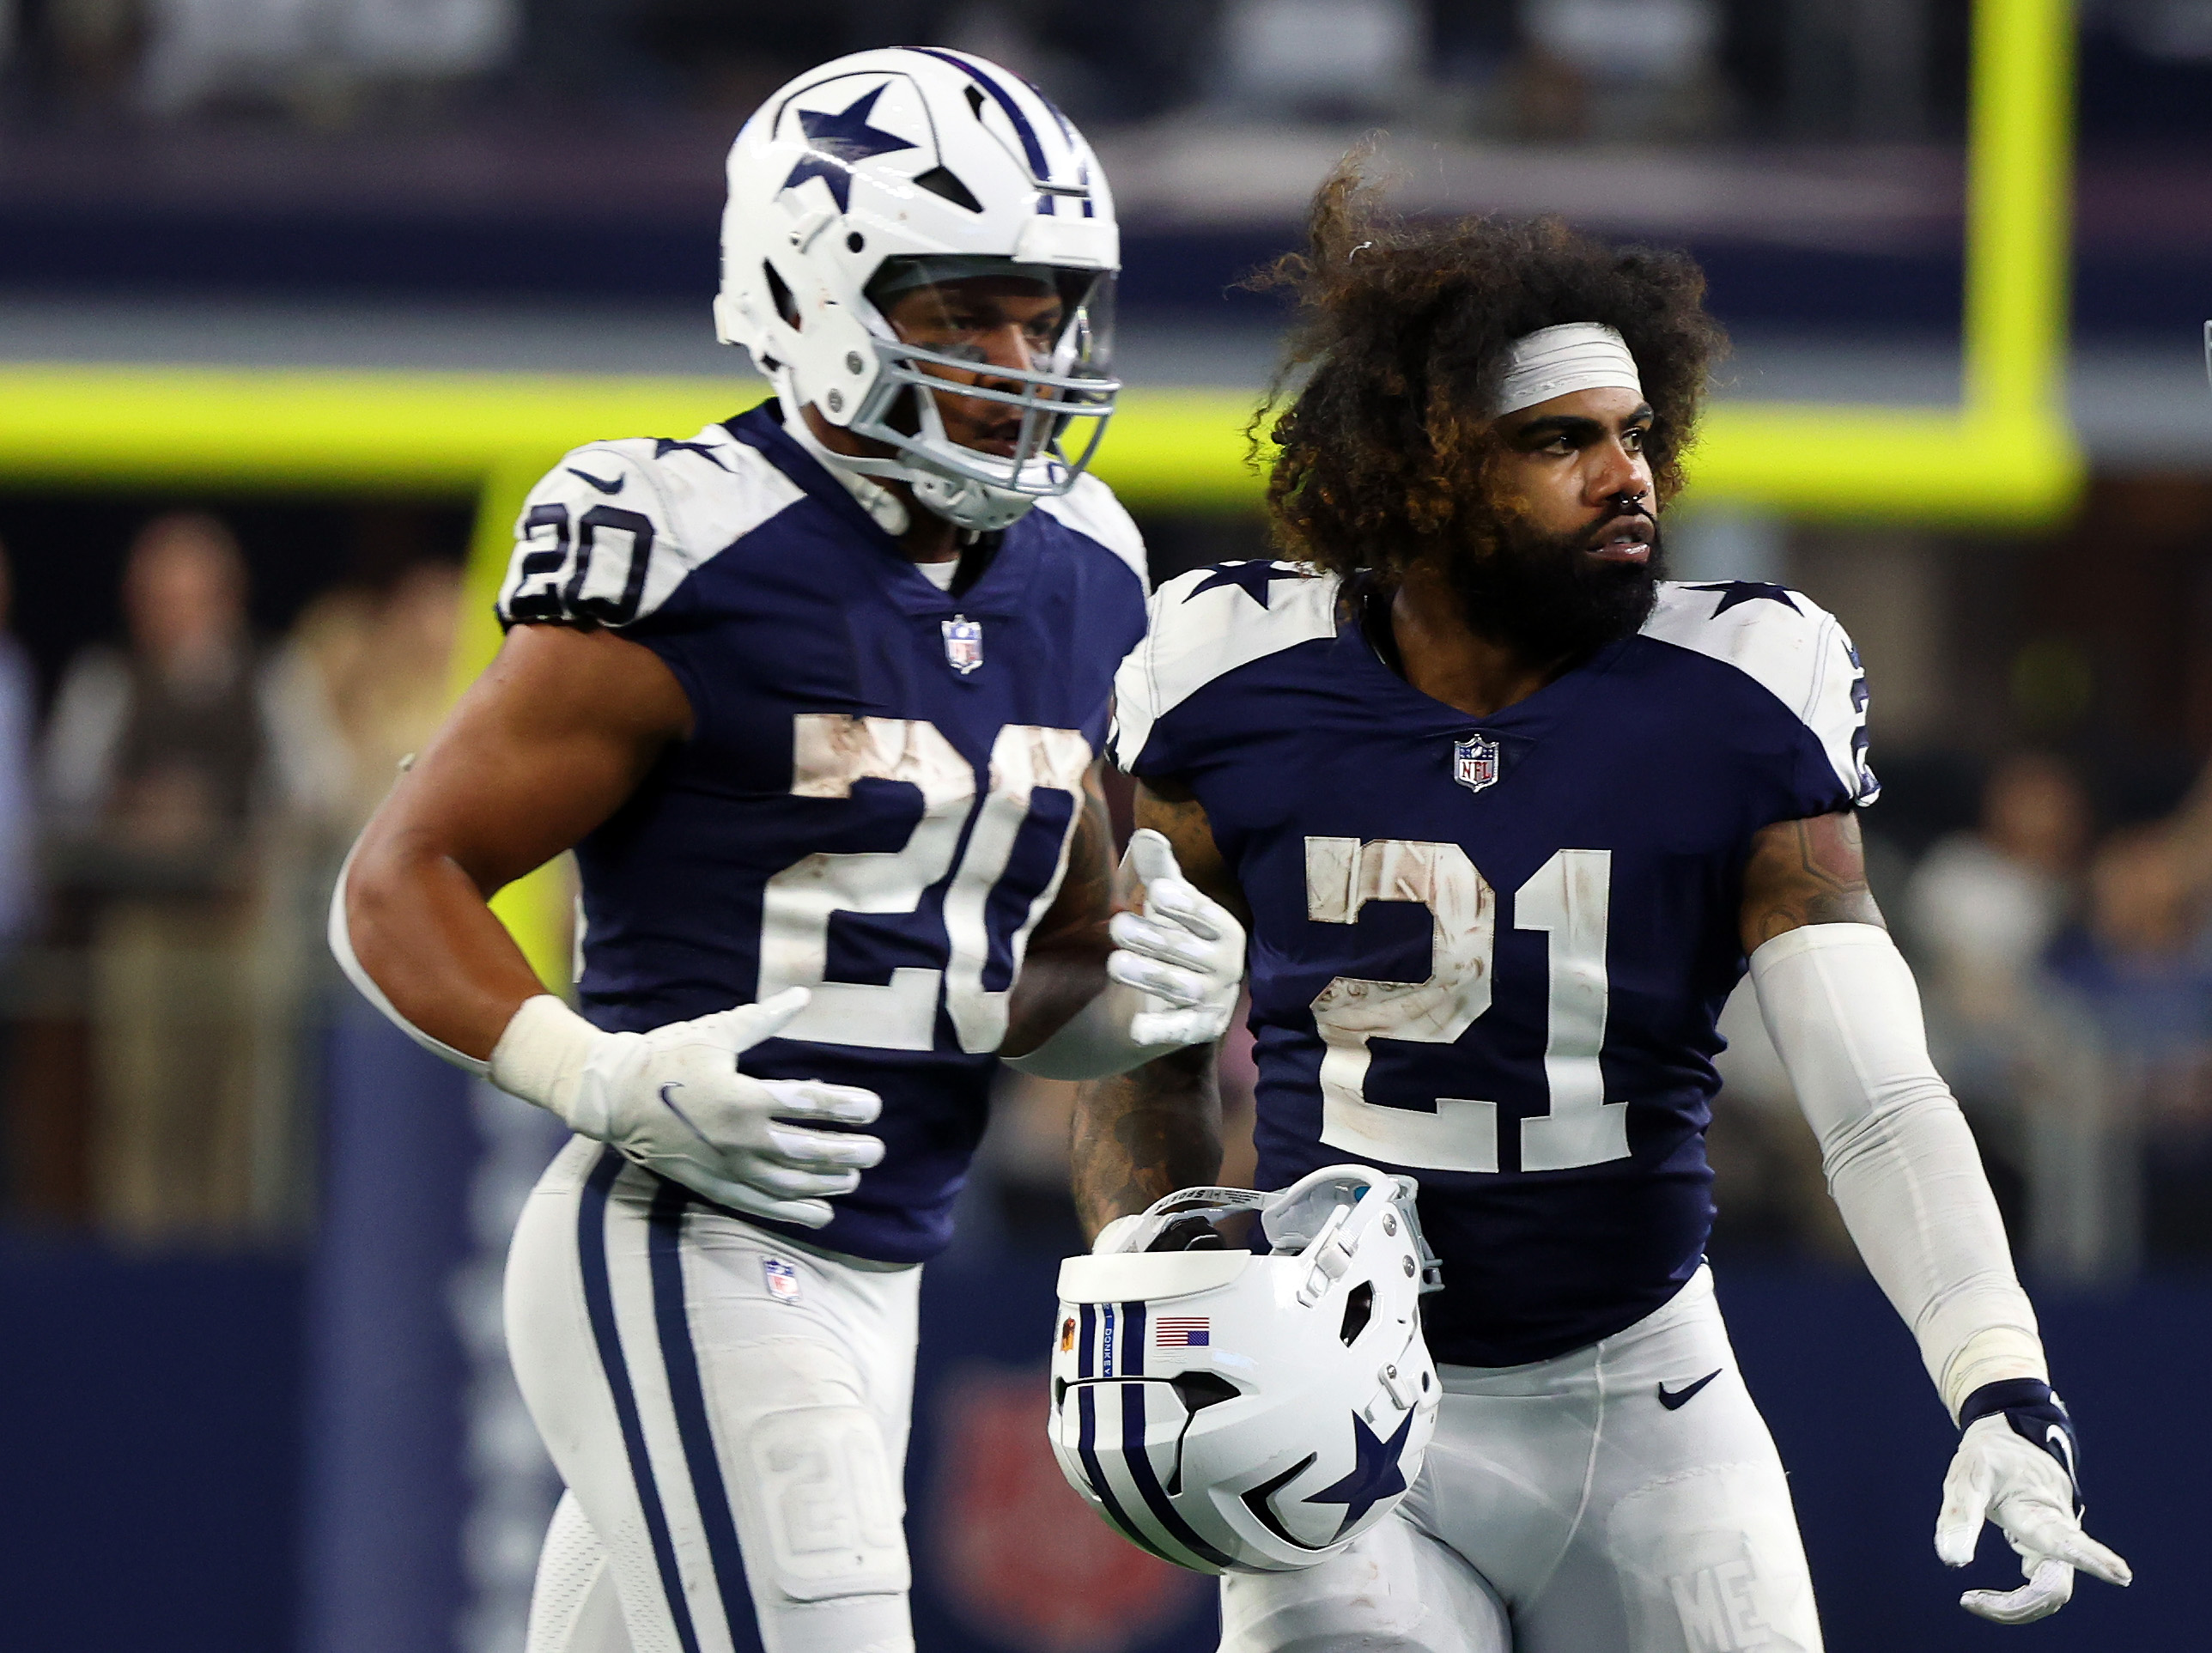 Tony Pollard #20 and Ezekiel Elliott #21 of the Dallas Cowboys stand on the field during the game against the New York Giants at AT&amp;T Stadium on November 24, 2022 in Arlington, Texas.